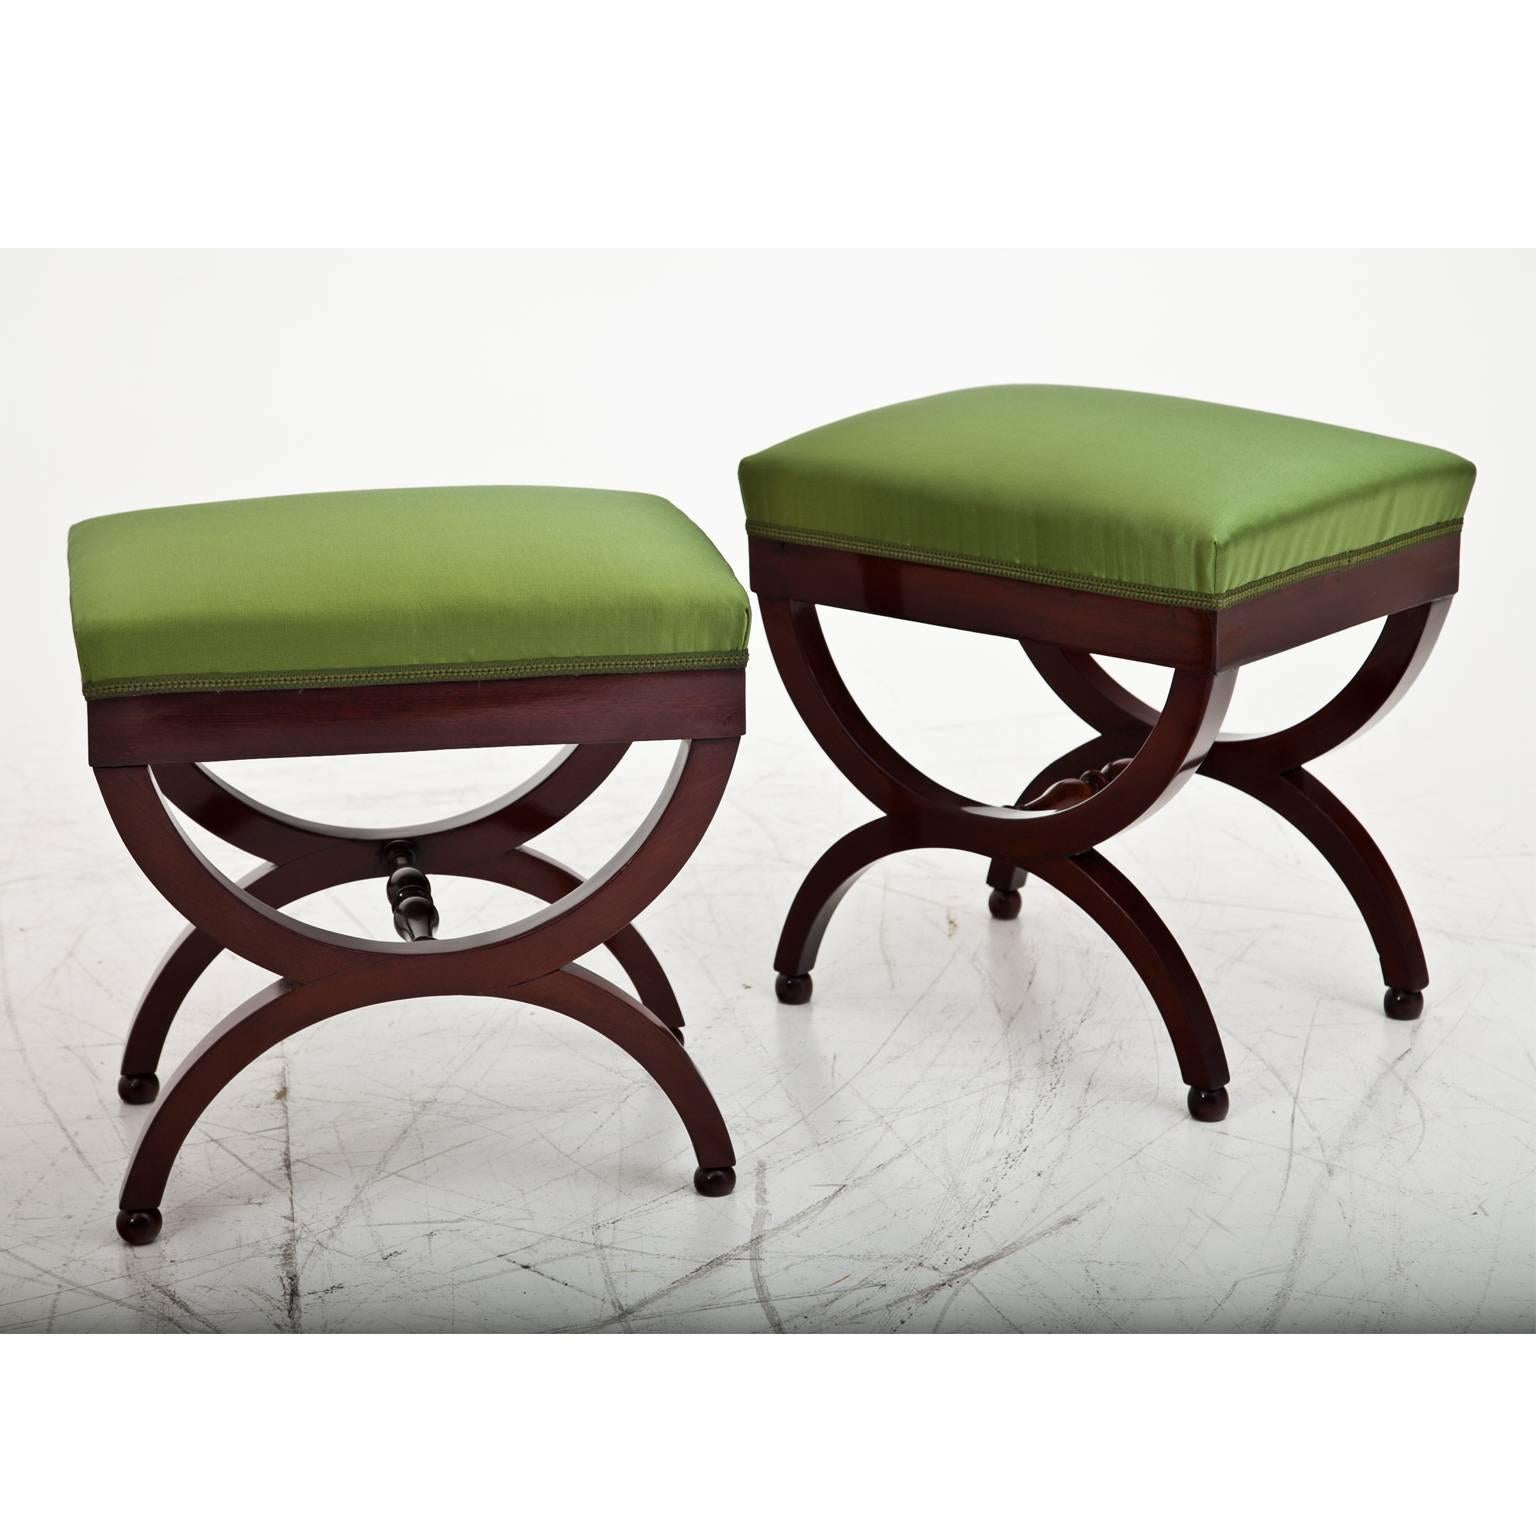 Pair of stools on X-shaped base with ball-feet and turned stretchers. The stools are restored and upholstered with a high quality fabric.